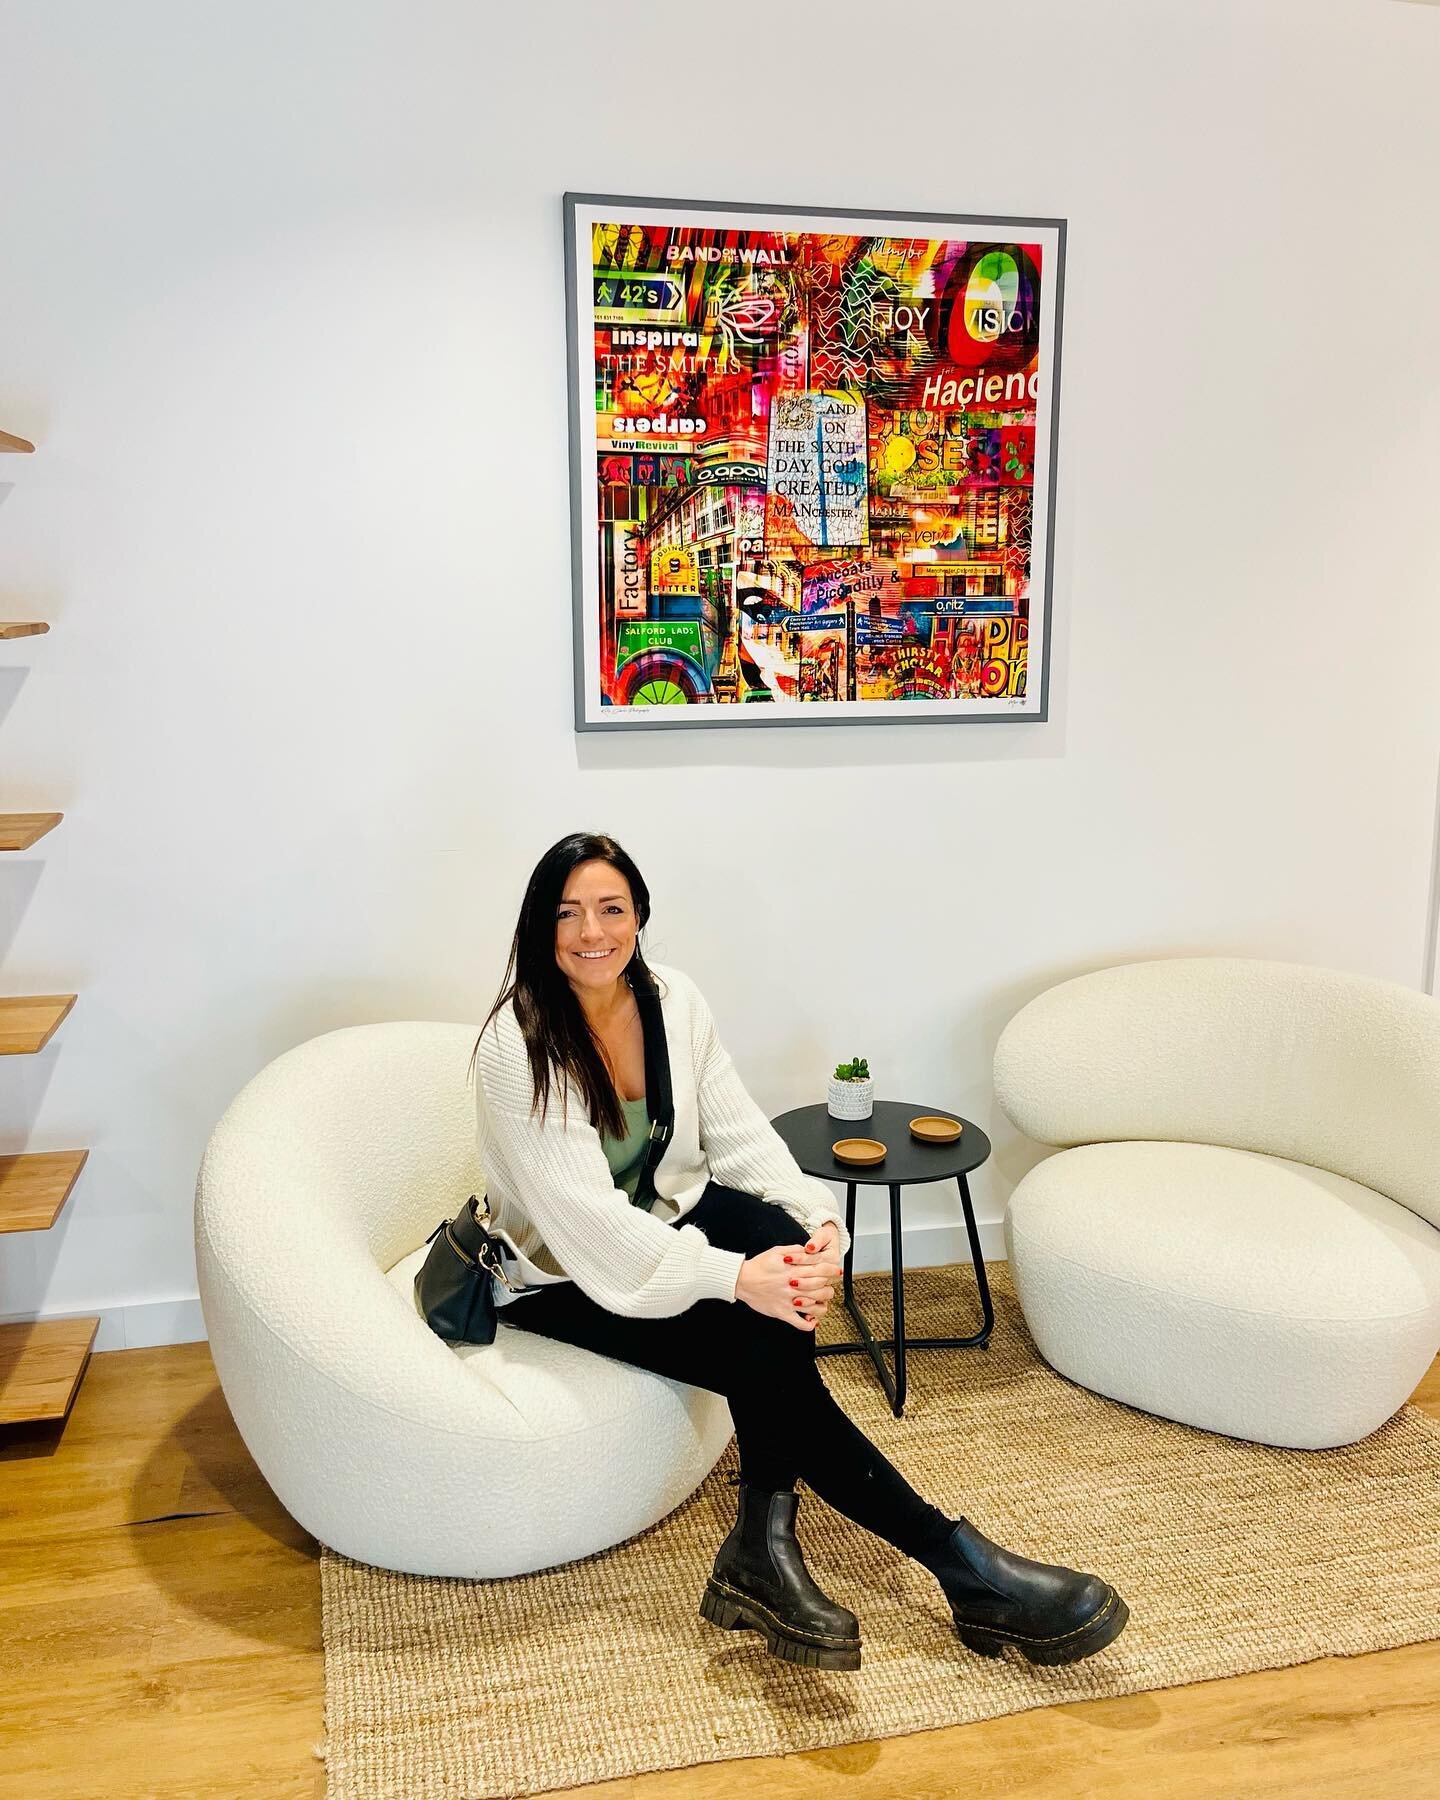 Here I am with some of my large pieces which have gone up in @cubowork in Manchester. Amazing office spaces to rent right in the heart of Manchester with an on-site gym and coffee, fizz and beer on tap. Cheers! 🥂

#manchesterart #manchesterartist #m